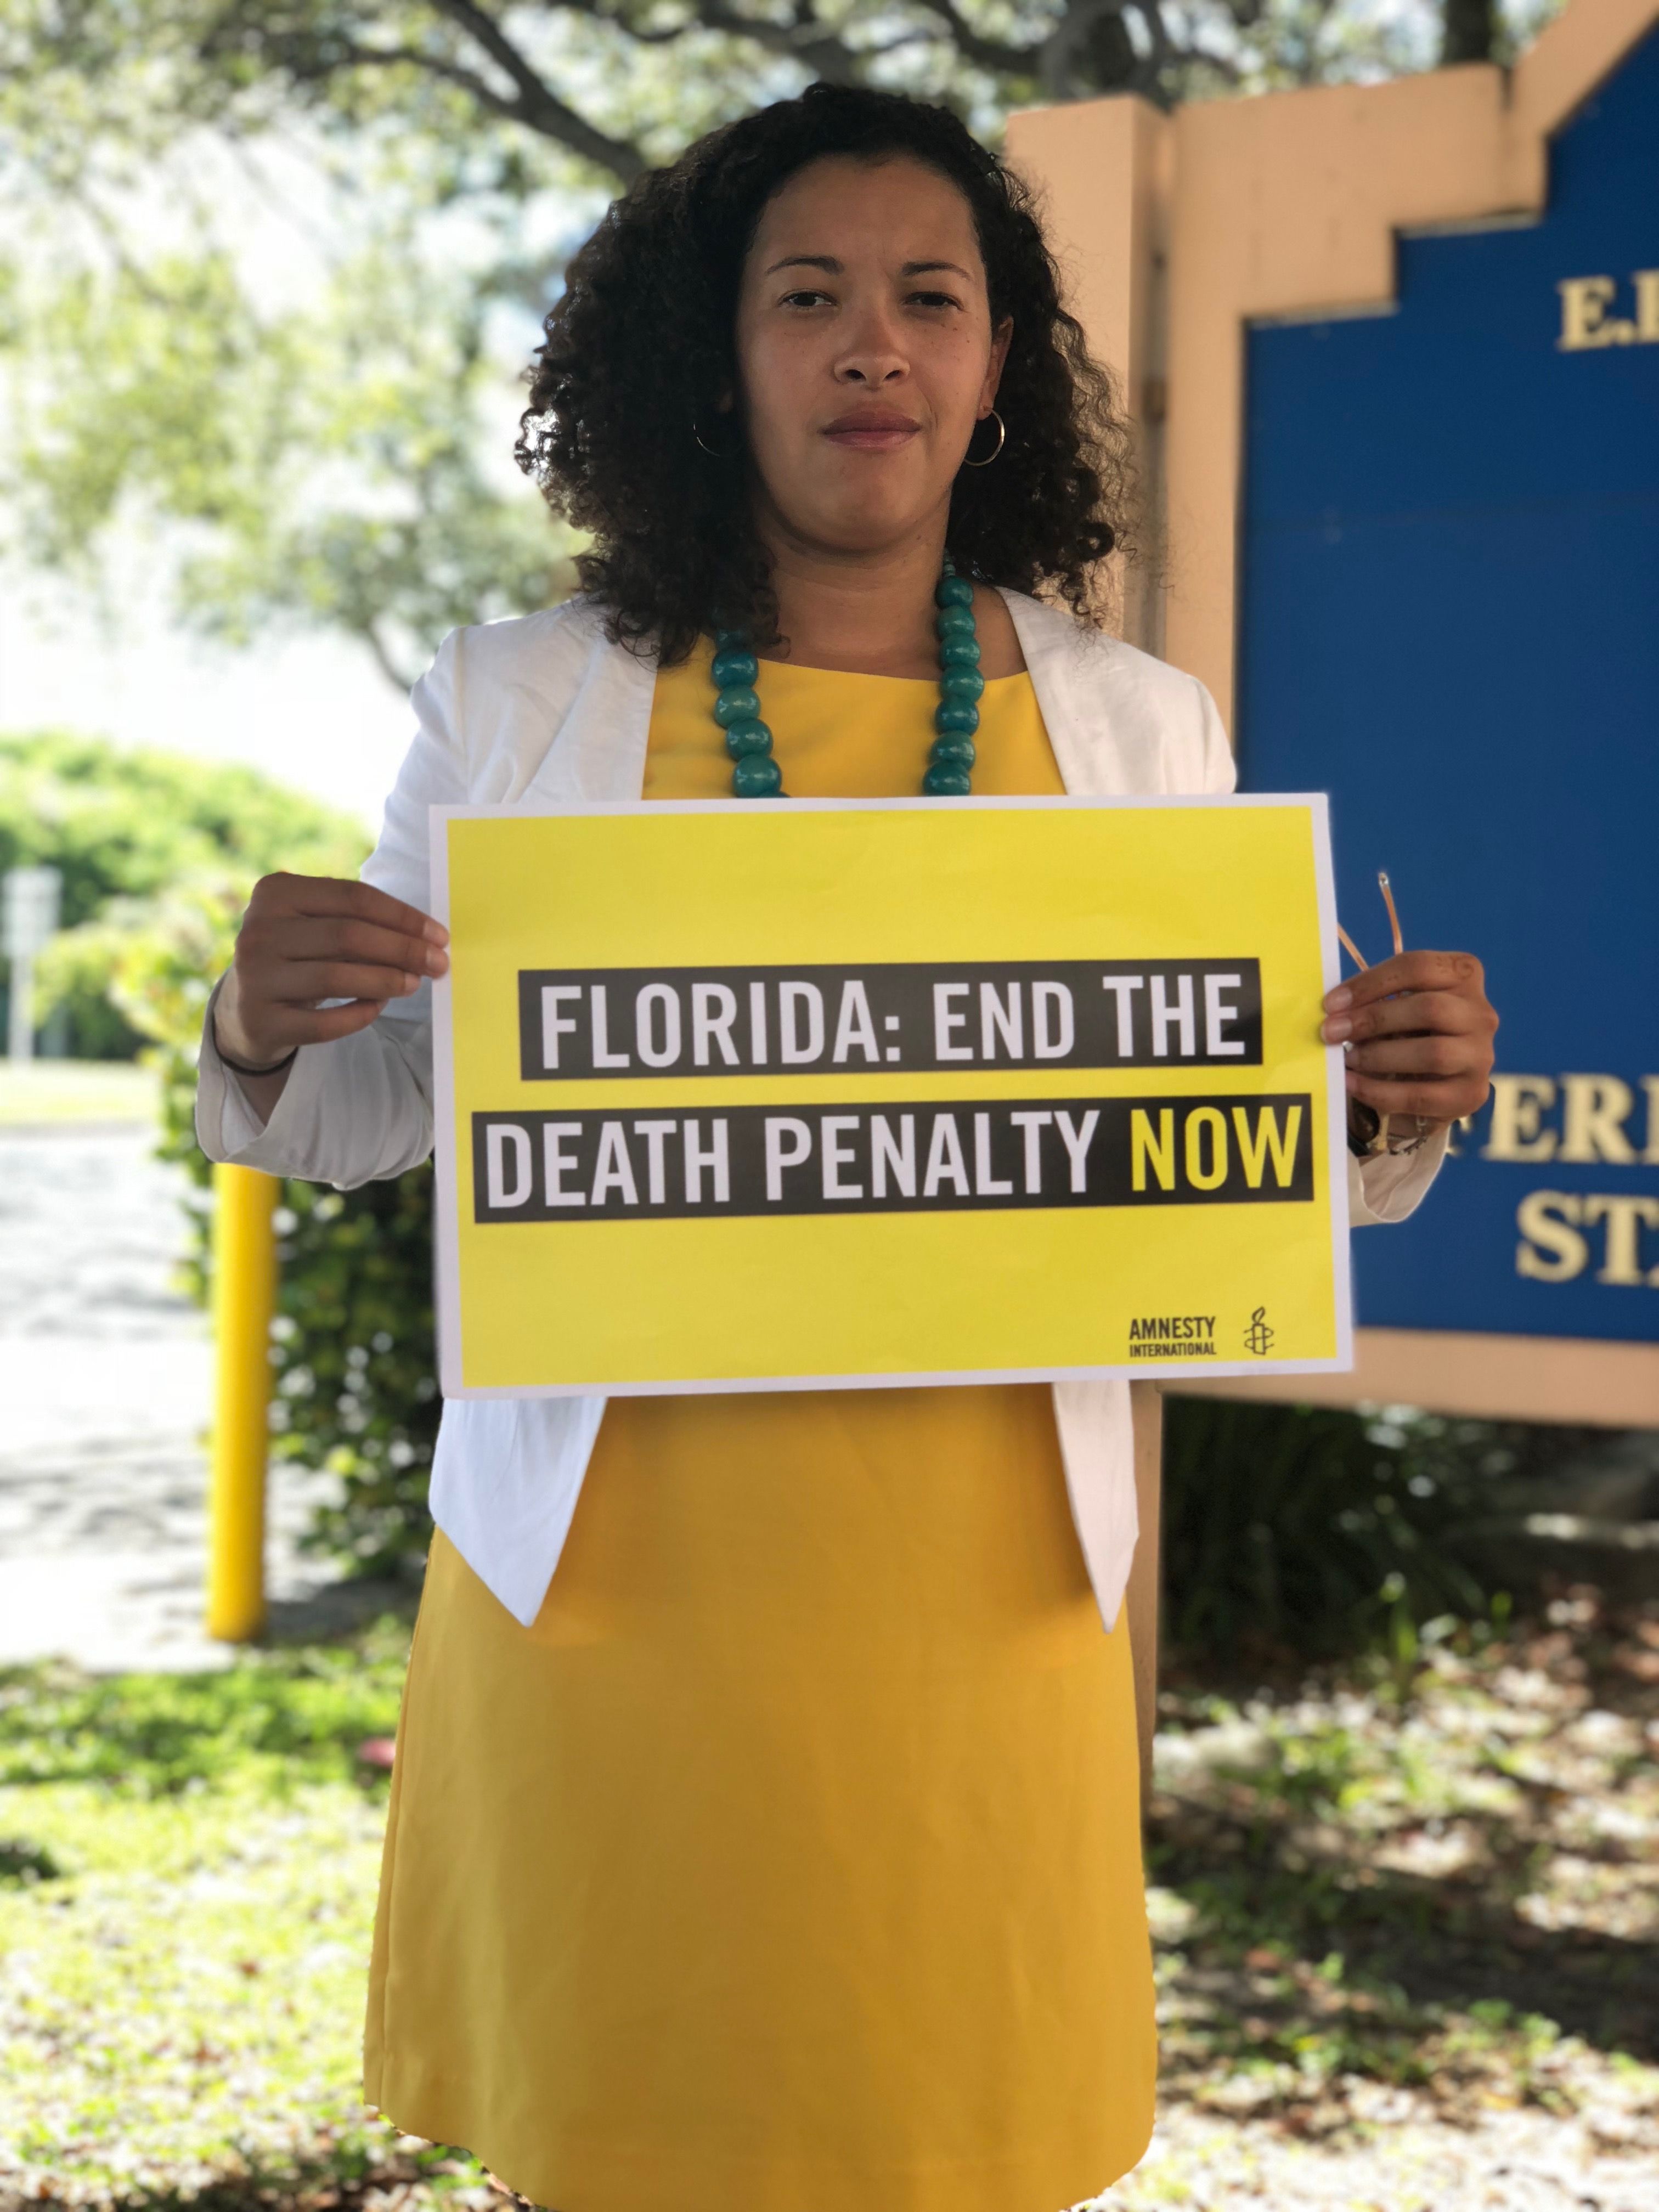 A woman holds a sign calling for the end of the death penalty